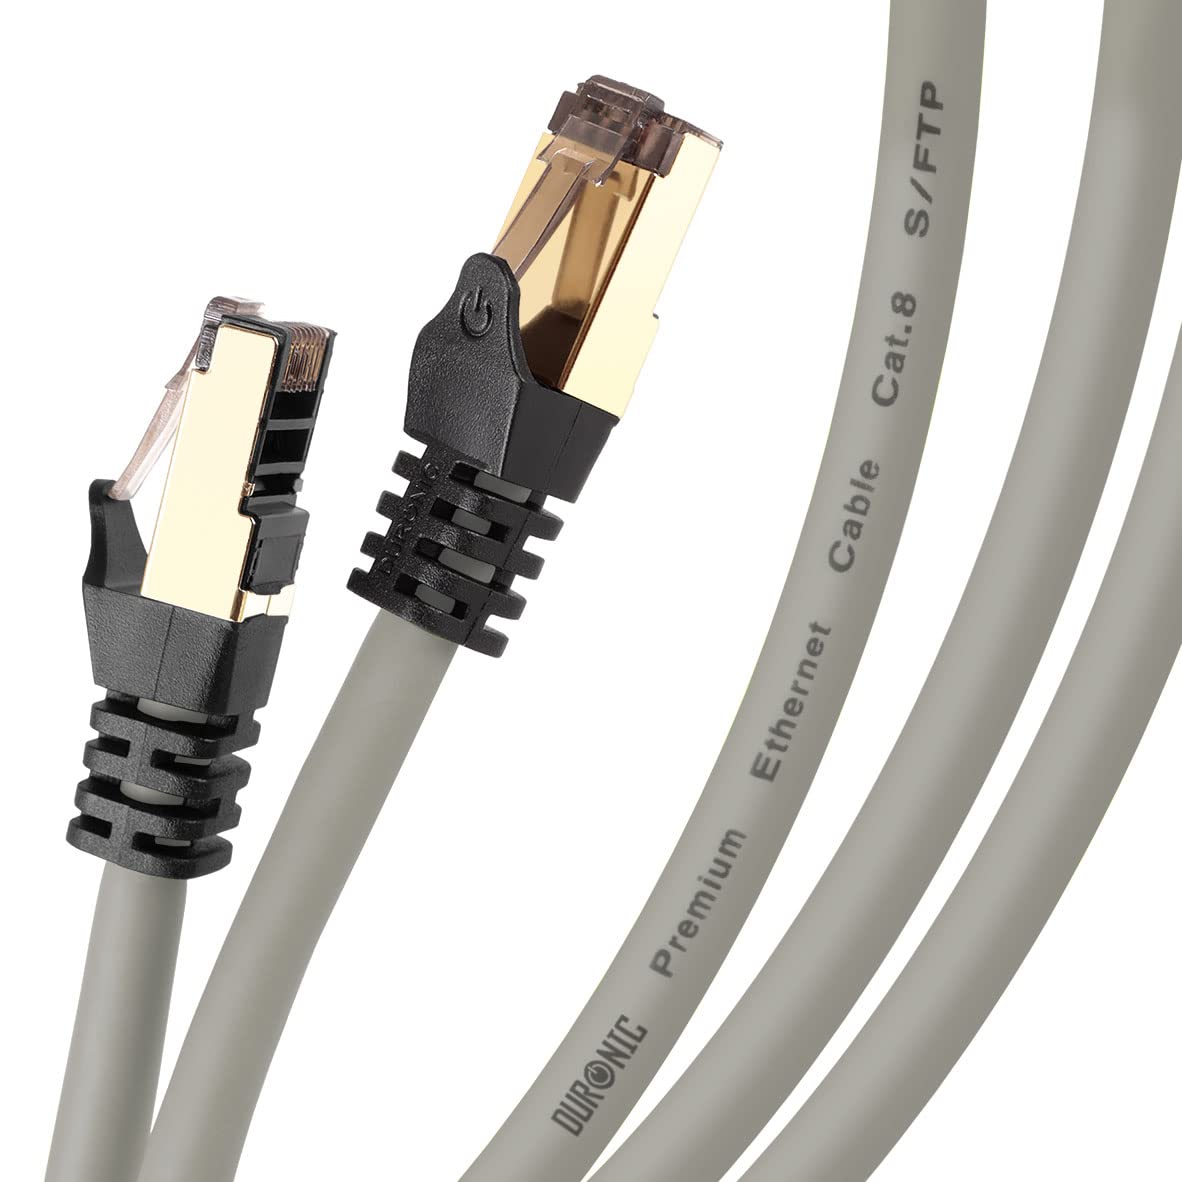 Duronic Ethernet Cable 0.5M High Speed CAT 8 Patch Network Shielded Lead 2GHz / 2000MHz / 40 Gigabit, CAT8 SFTP Wire, Snagless RJ45 Super-Fast Data - Grey